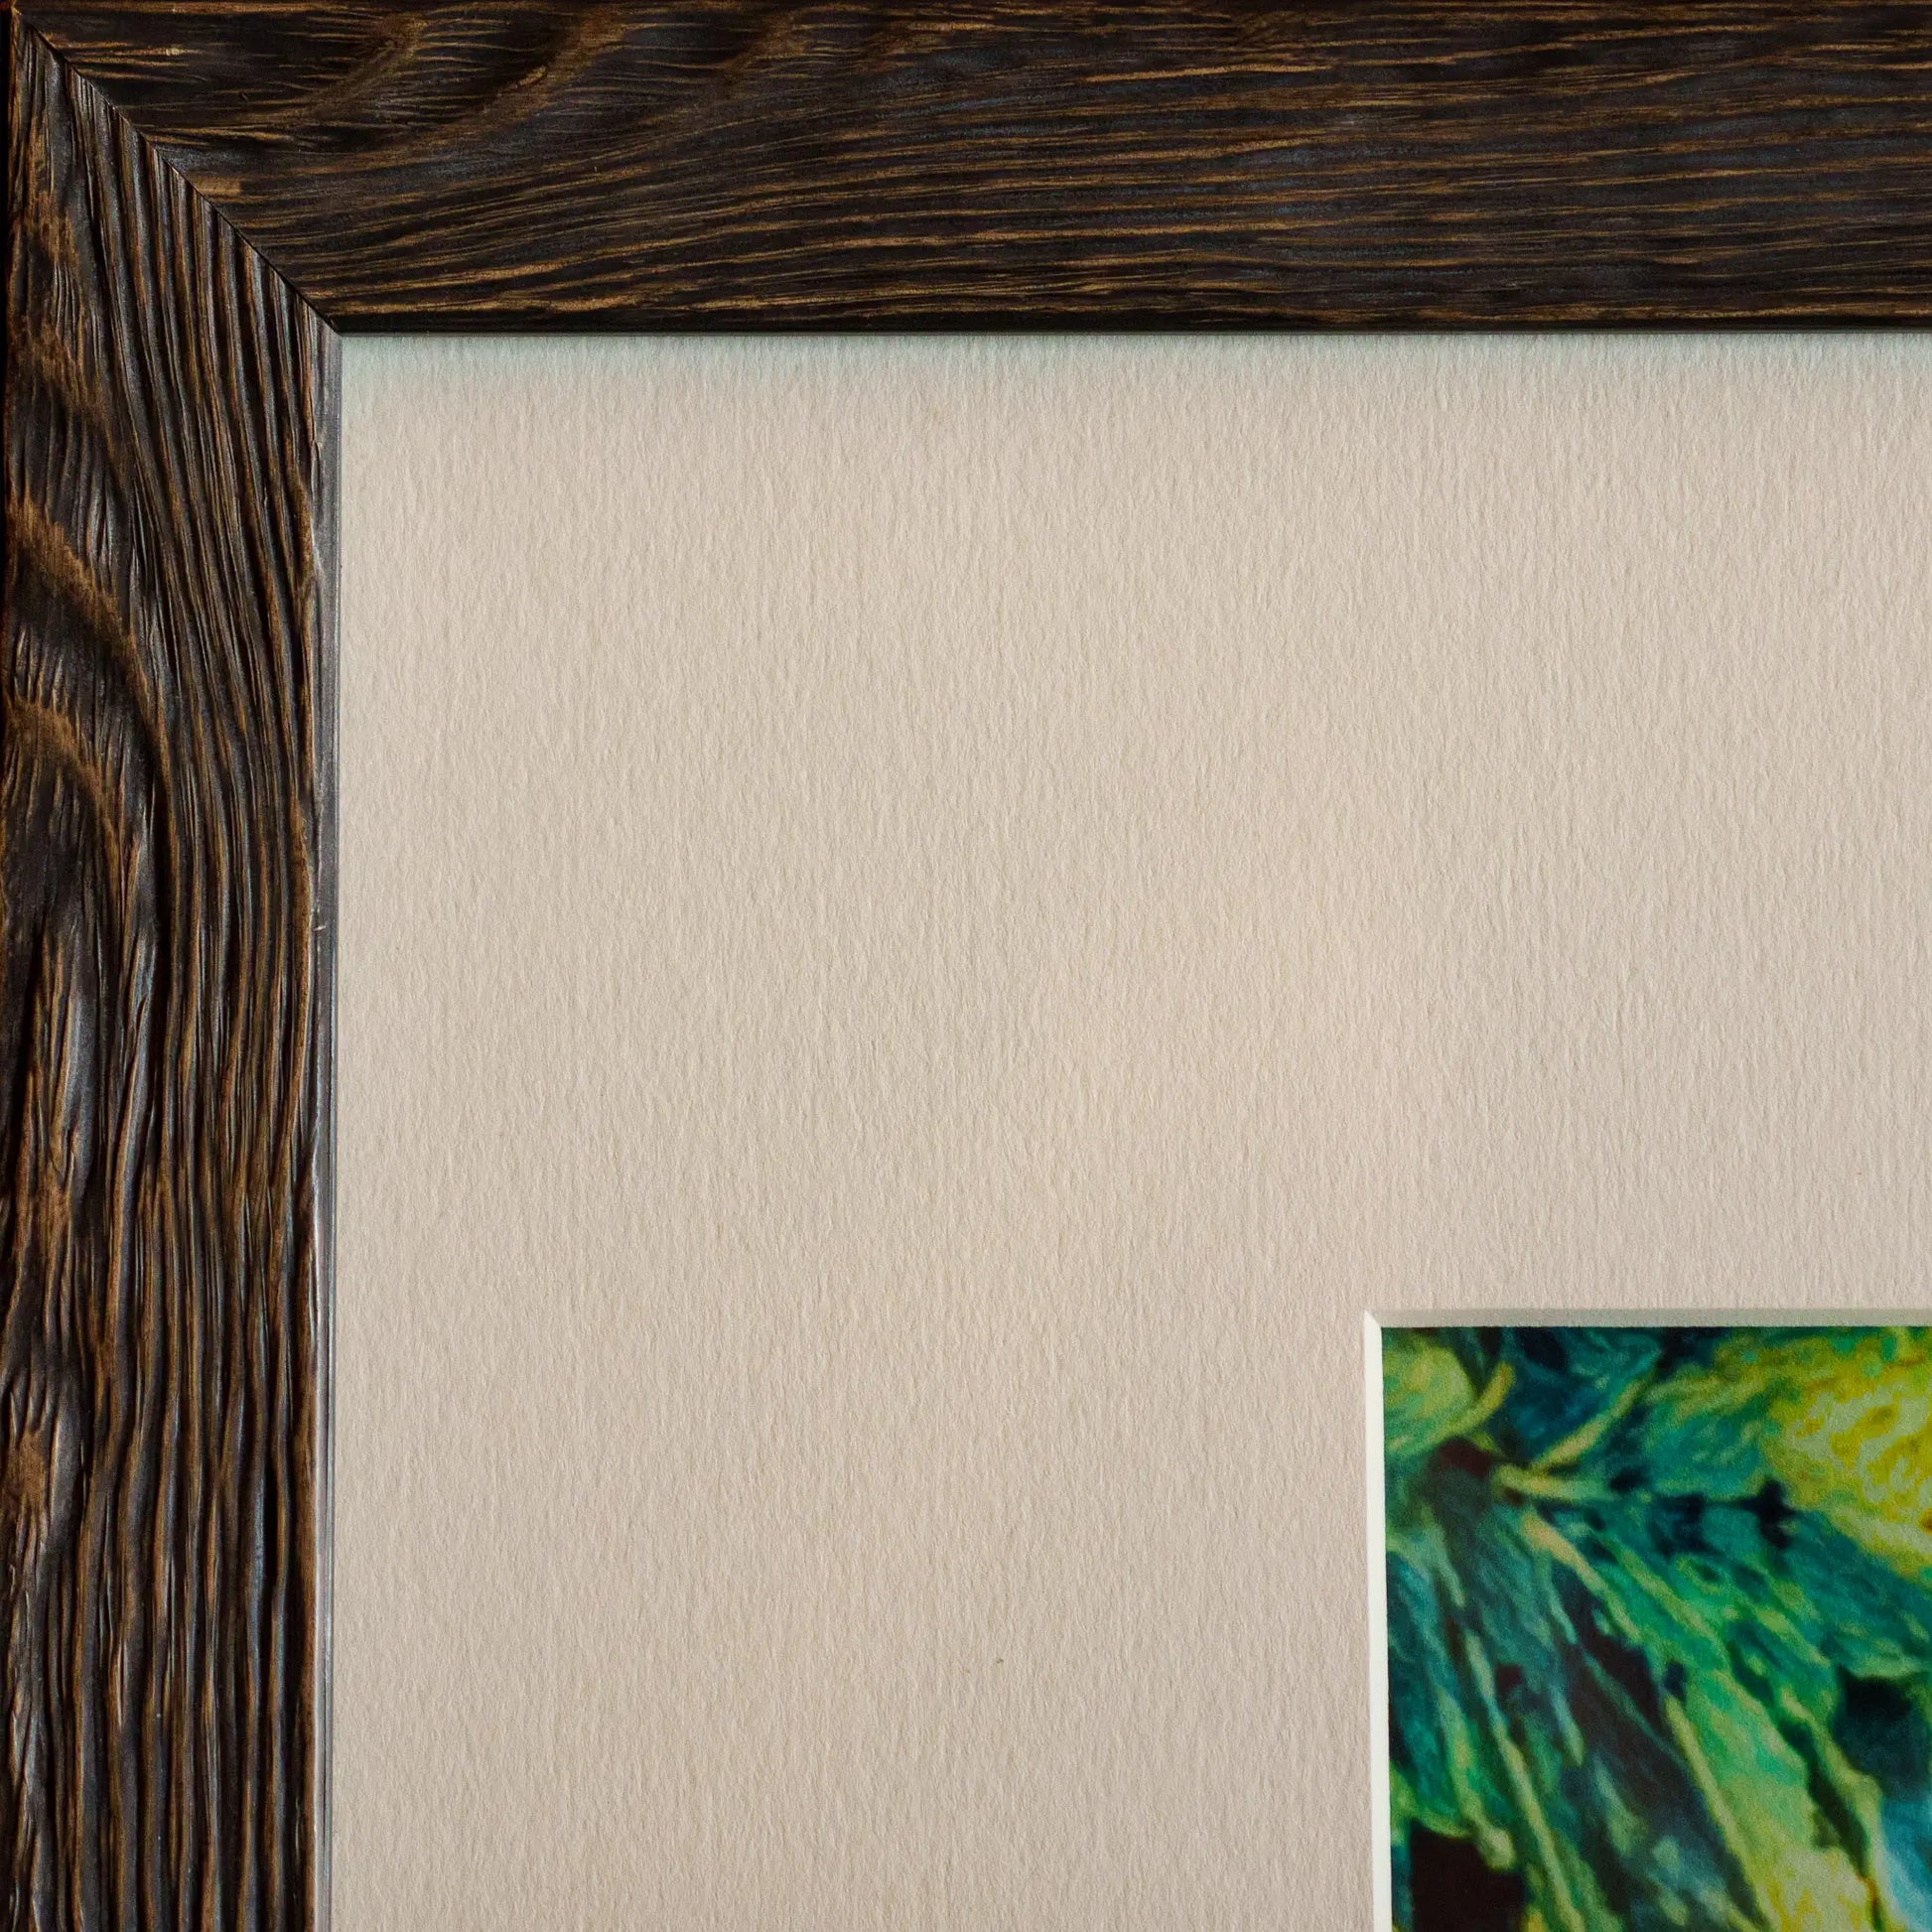 Close-up of the textured wooden frame and matboard